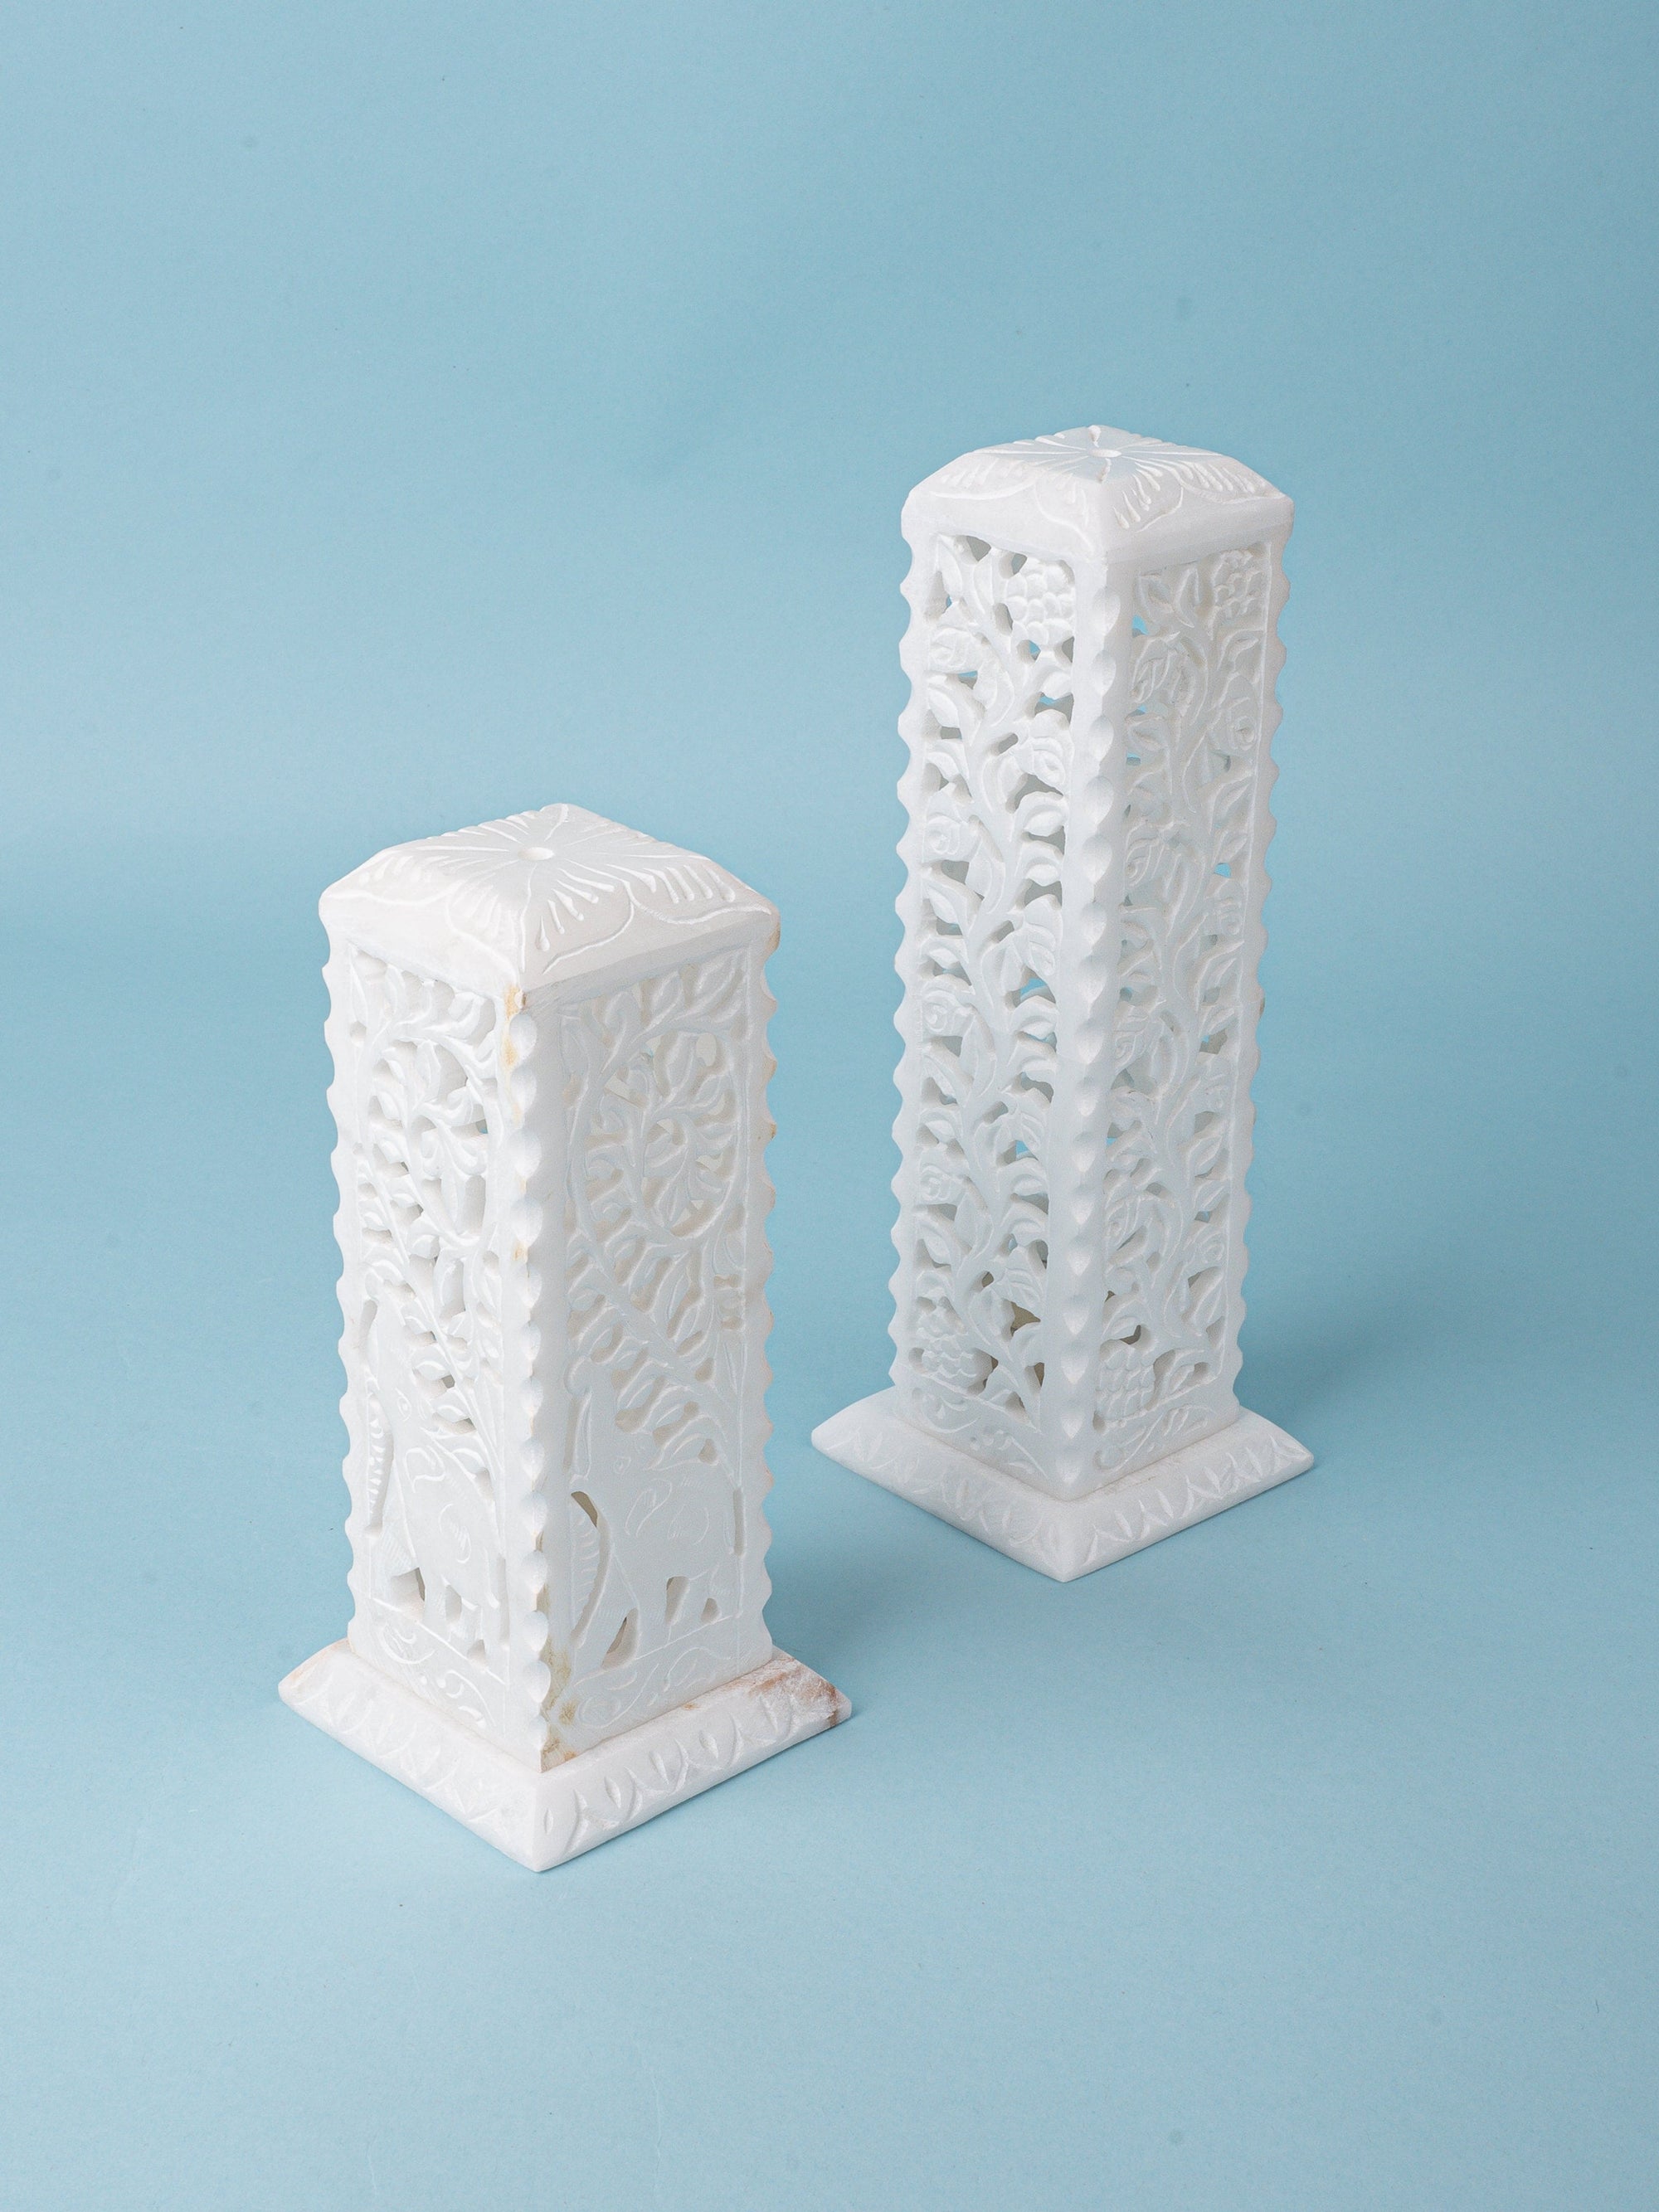 Set of 2 Beautiful Candle Covers Hand Carved of White Marble Stone